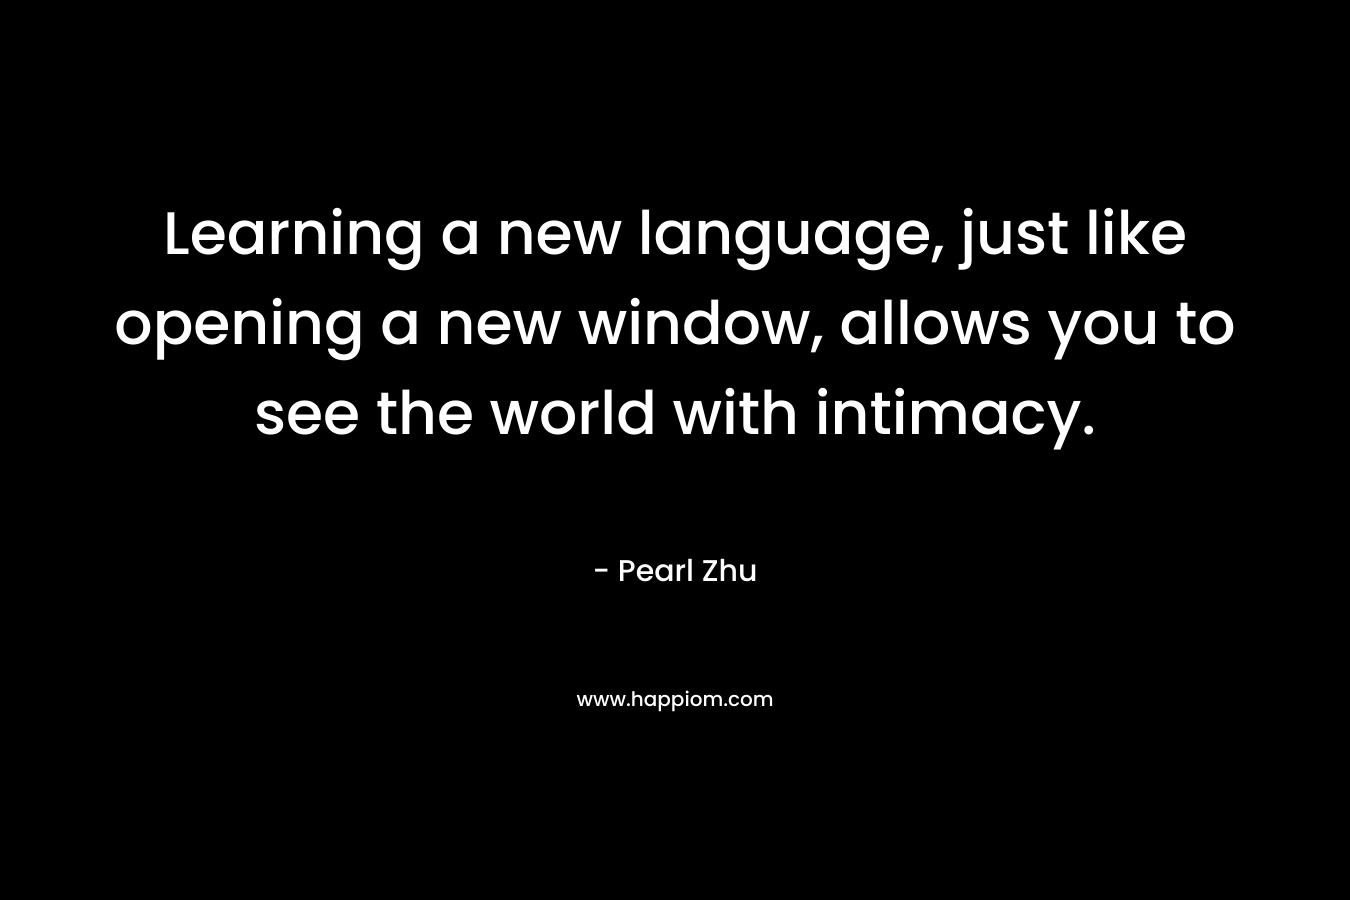 Learning a new language, just like opening a new window, allows you to see the world with intimacy.